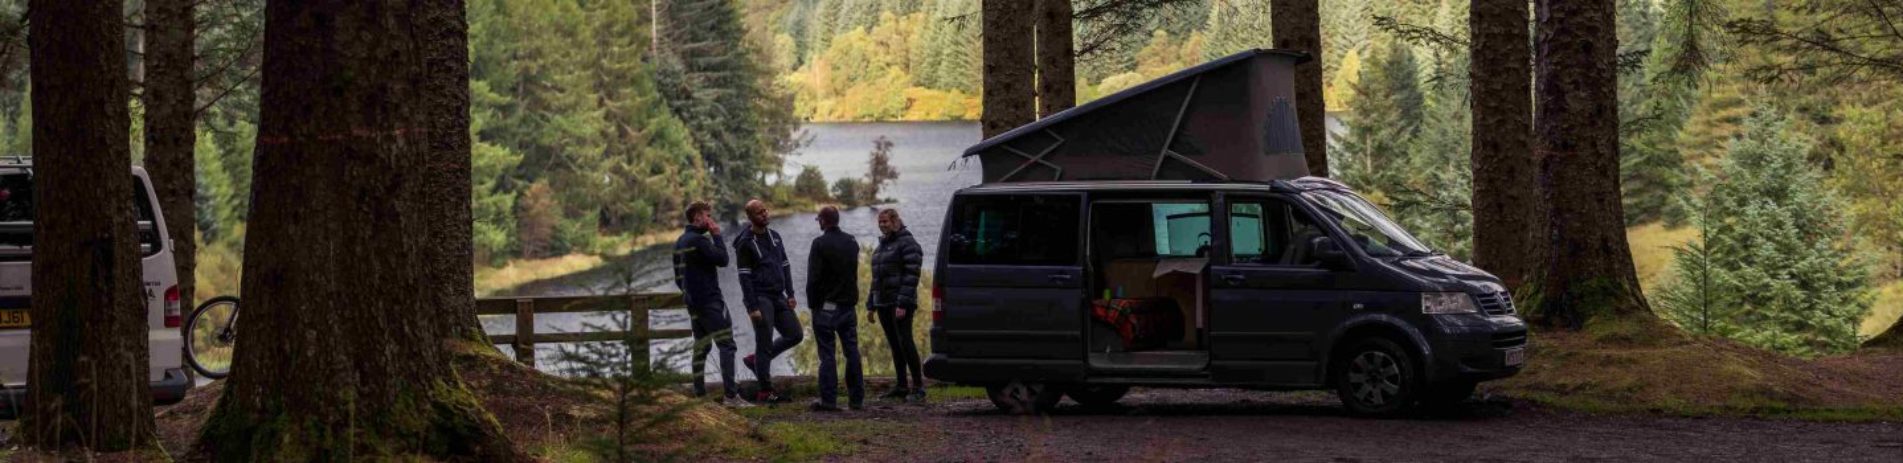 motorhome-campervan-national-park-three-man-and-a-woman-stand-outside-chatting-casually-stunning-view-of-loch-and-forests-behind-them